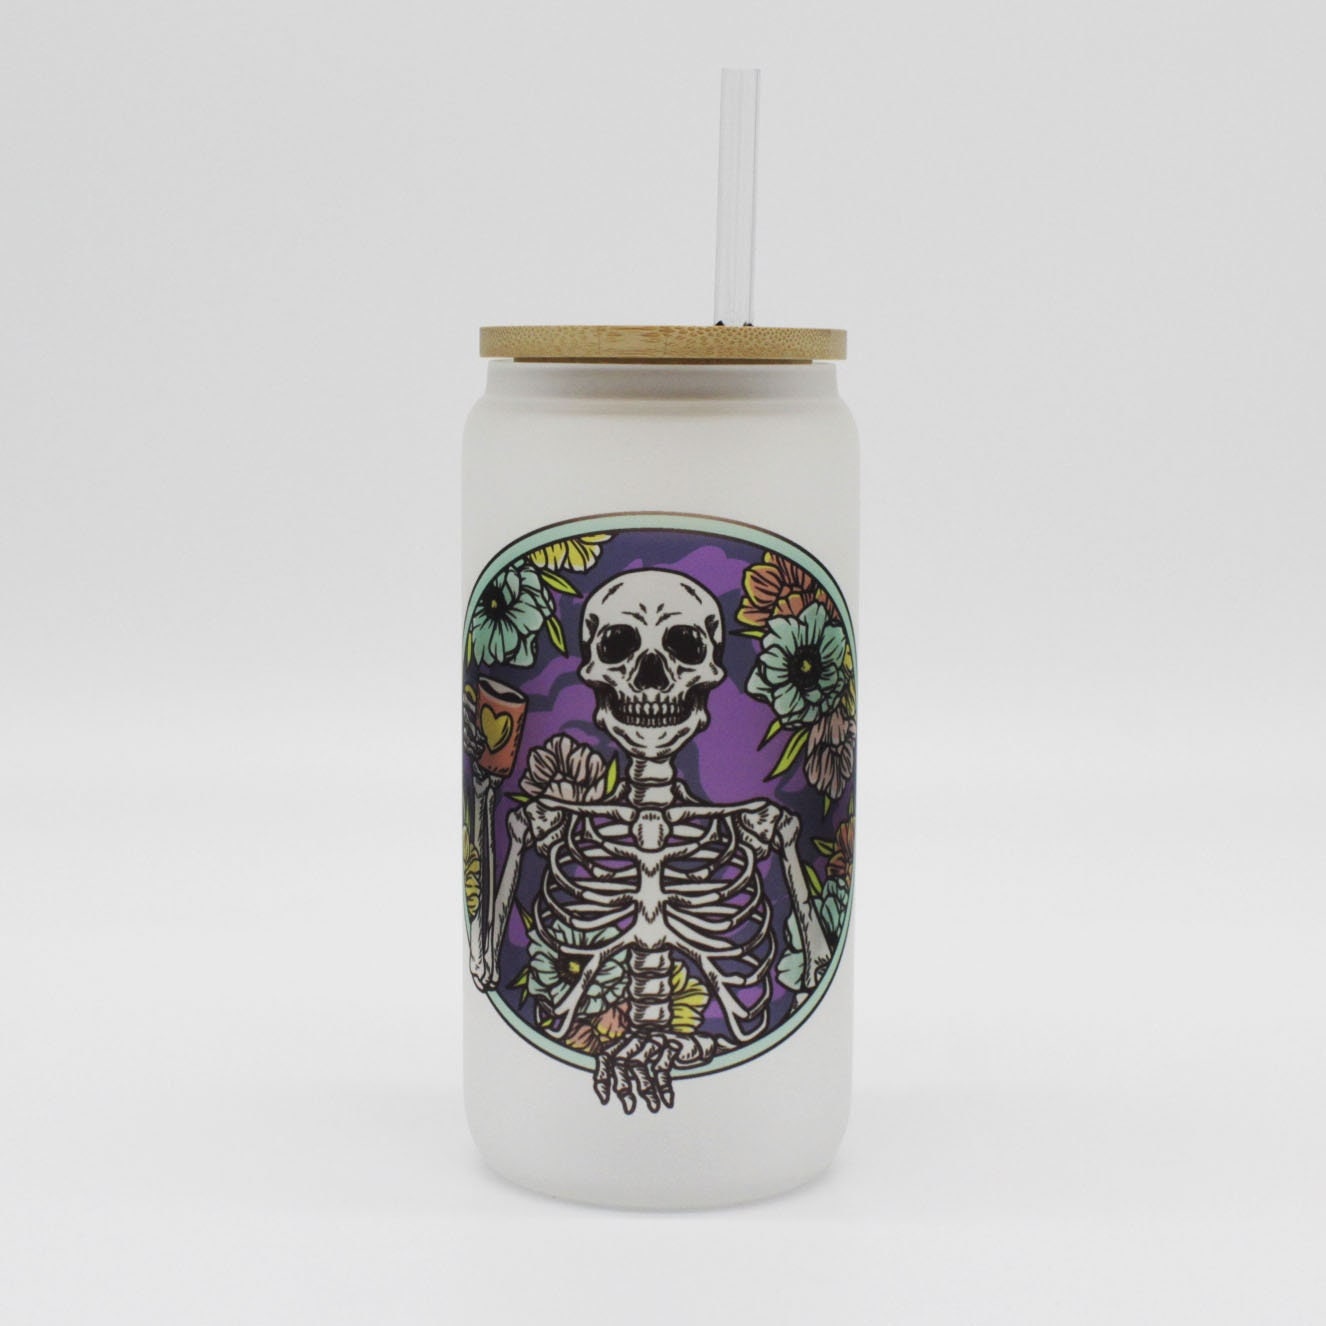 Dead Without Coffee Frosted Glass Cup